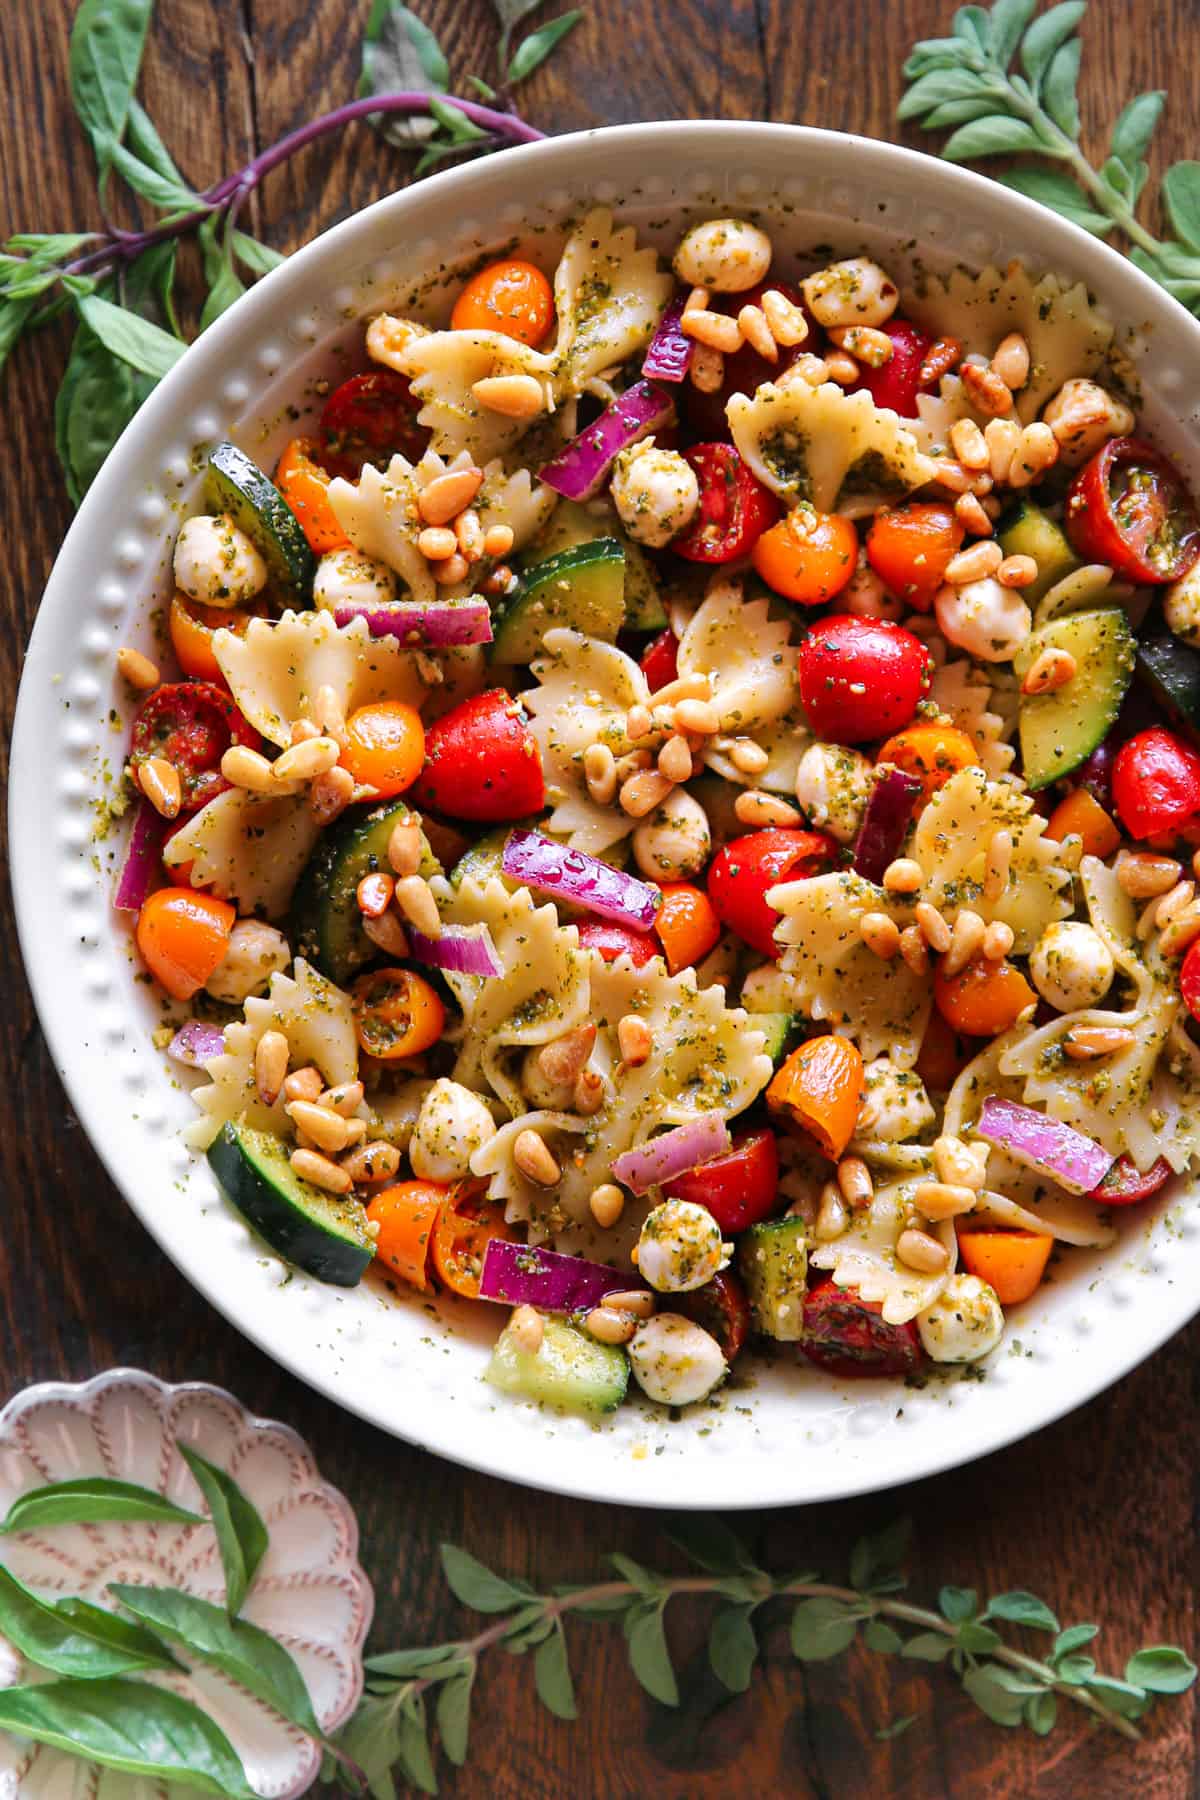 Pesto Pasta Salad with Cherry Tomatoes, Cucumber, Red Onion, Pine Nuts, and Mozzarella cheese - in a white bowl.